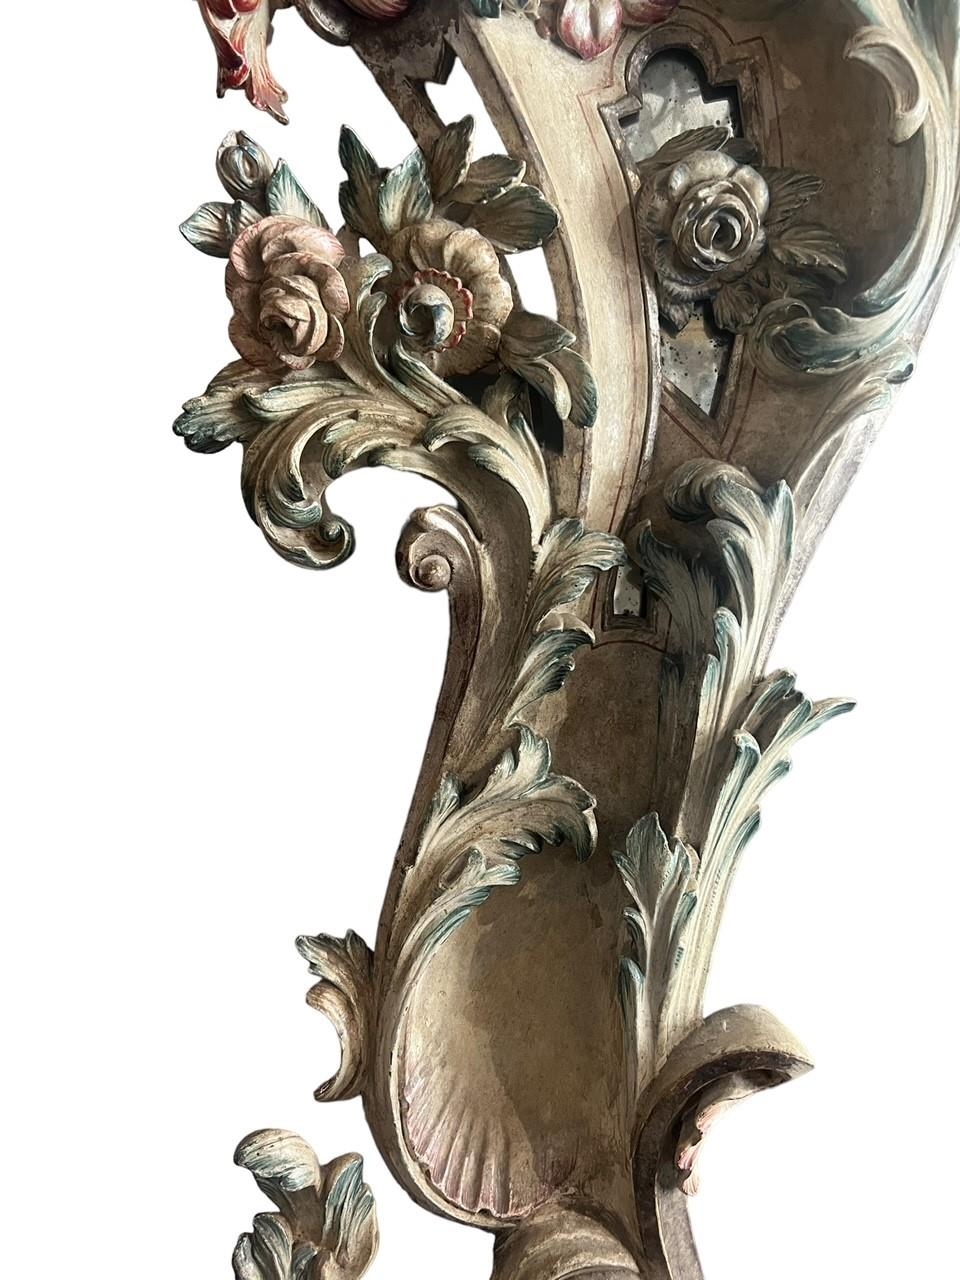 A VERY LARGE AND IMPRESSIVE 18TH CENTURY CARVED WOOD AND PAINTED ITALIAN VENETIAN ROCOCO MIRROR - Image 16 of 18